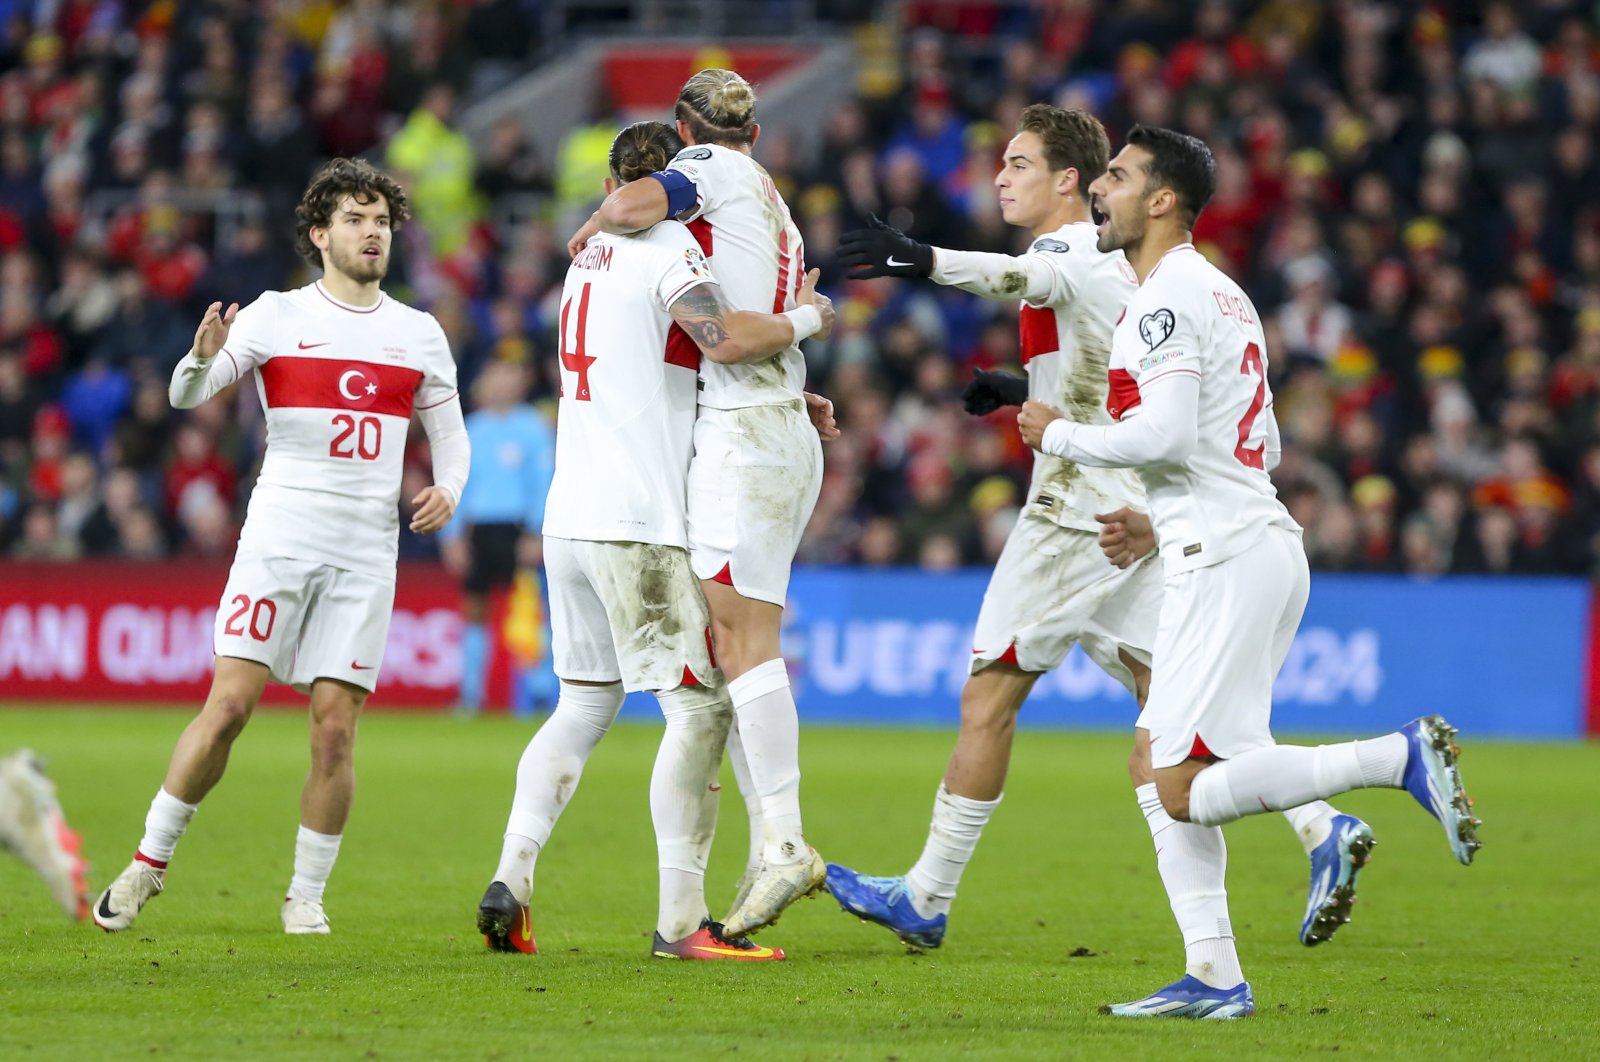 Turkish players celebrate after a goal during the UEFA Euro 2024 qualifier match against Wales at Cardiff City Stadium, Cardiff, U.K., Nov. 21, 2023. (Getty Images Photo)